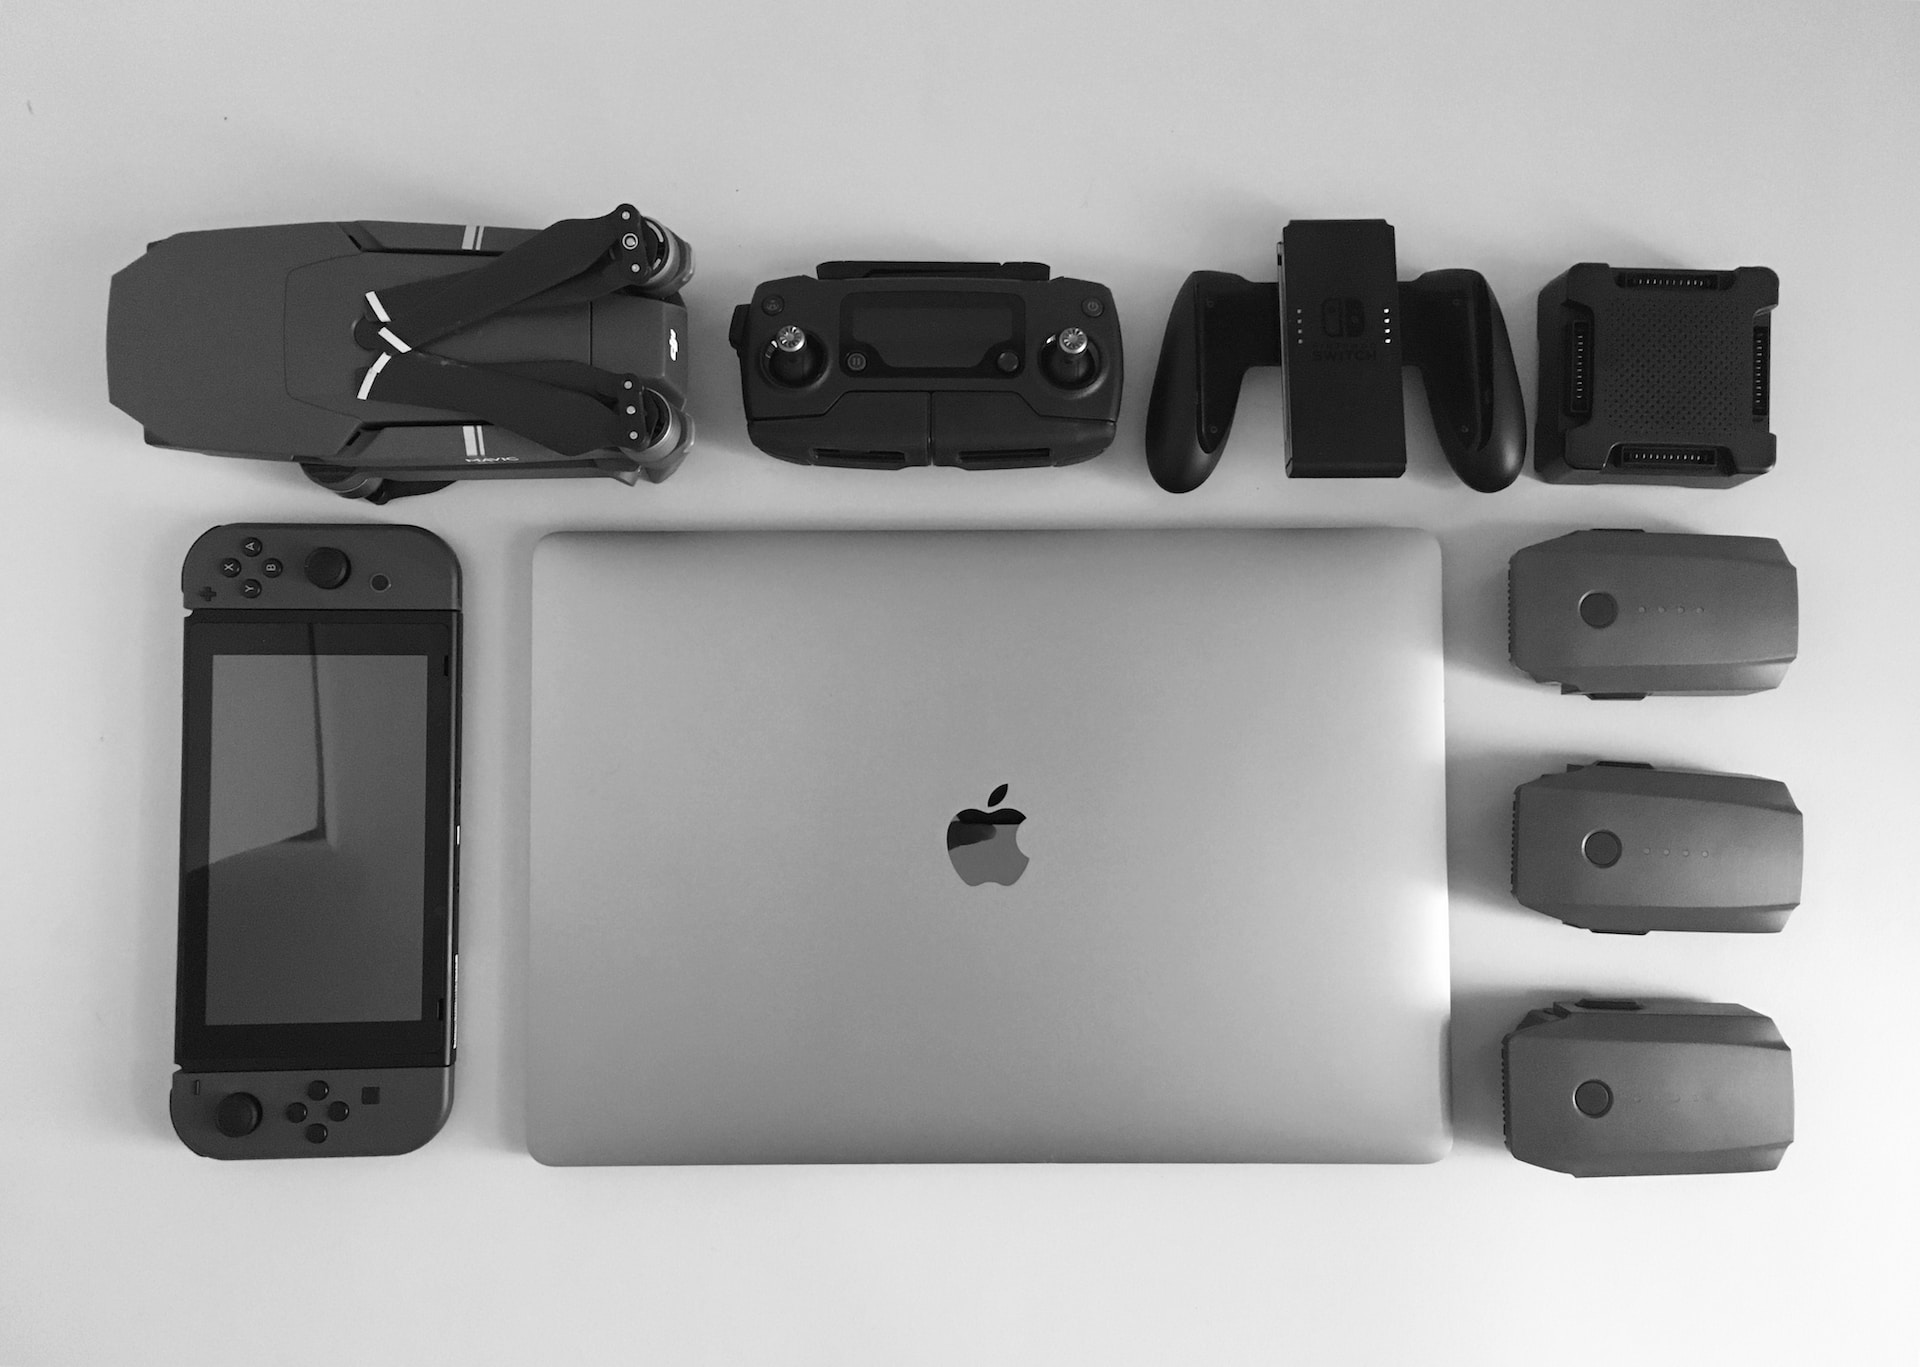 MacBook Pro near black Nintendo Switch, and game controller set